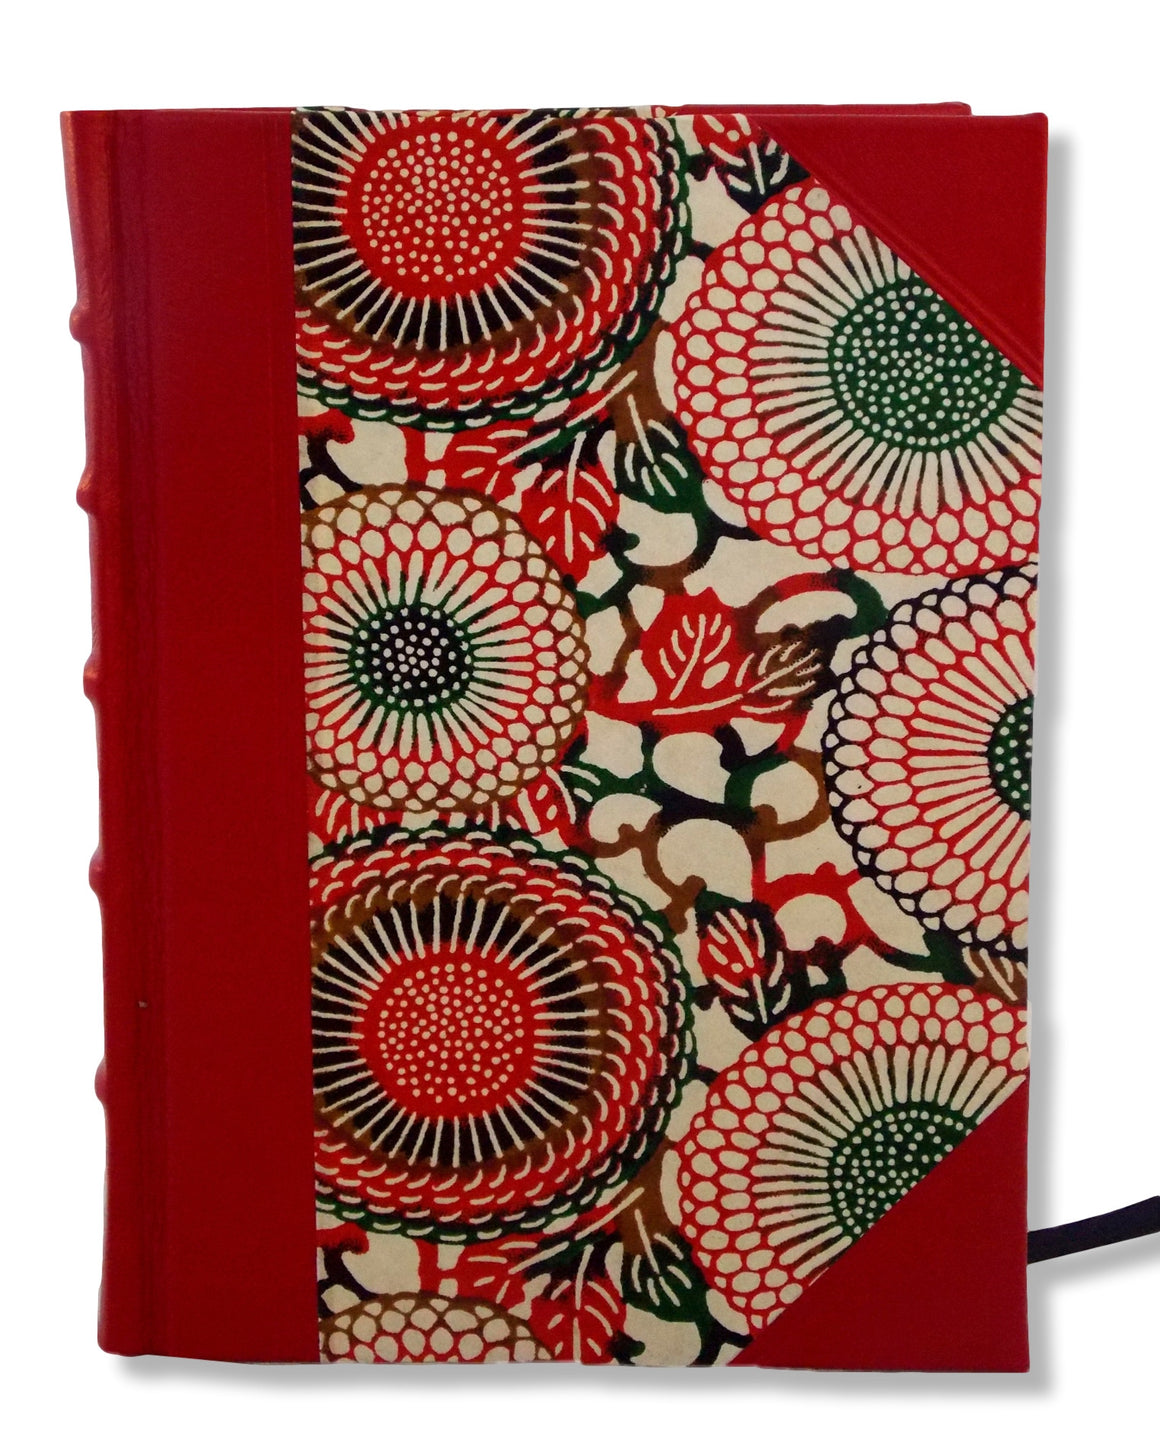 Red half leather blank journal featuring distinctive Japanese washi paper sides